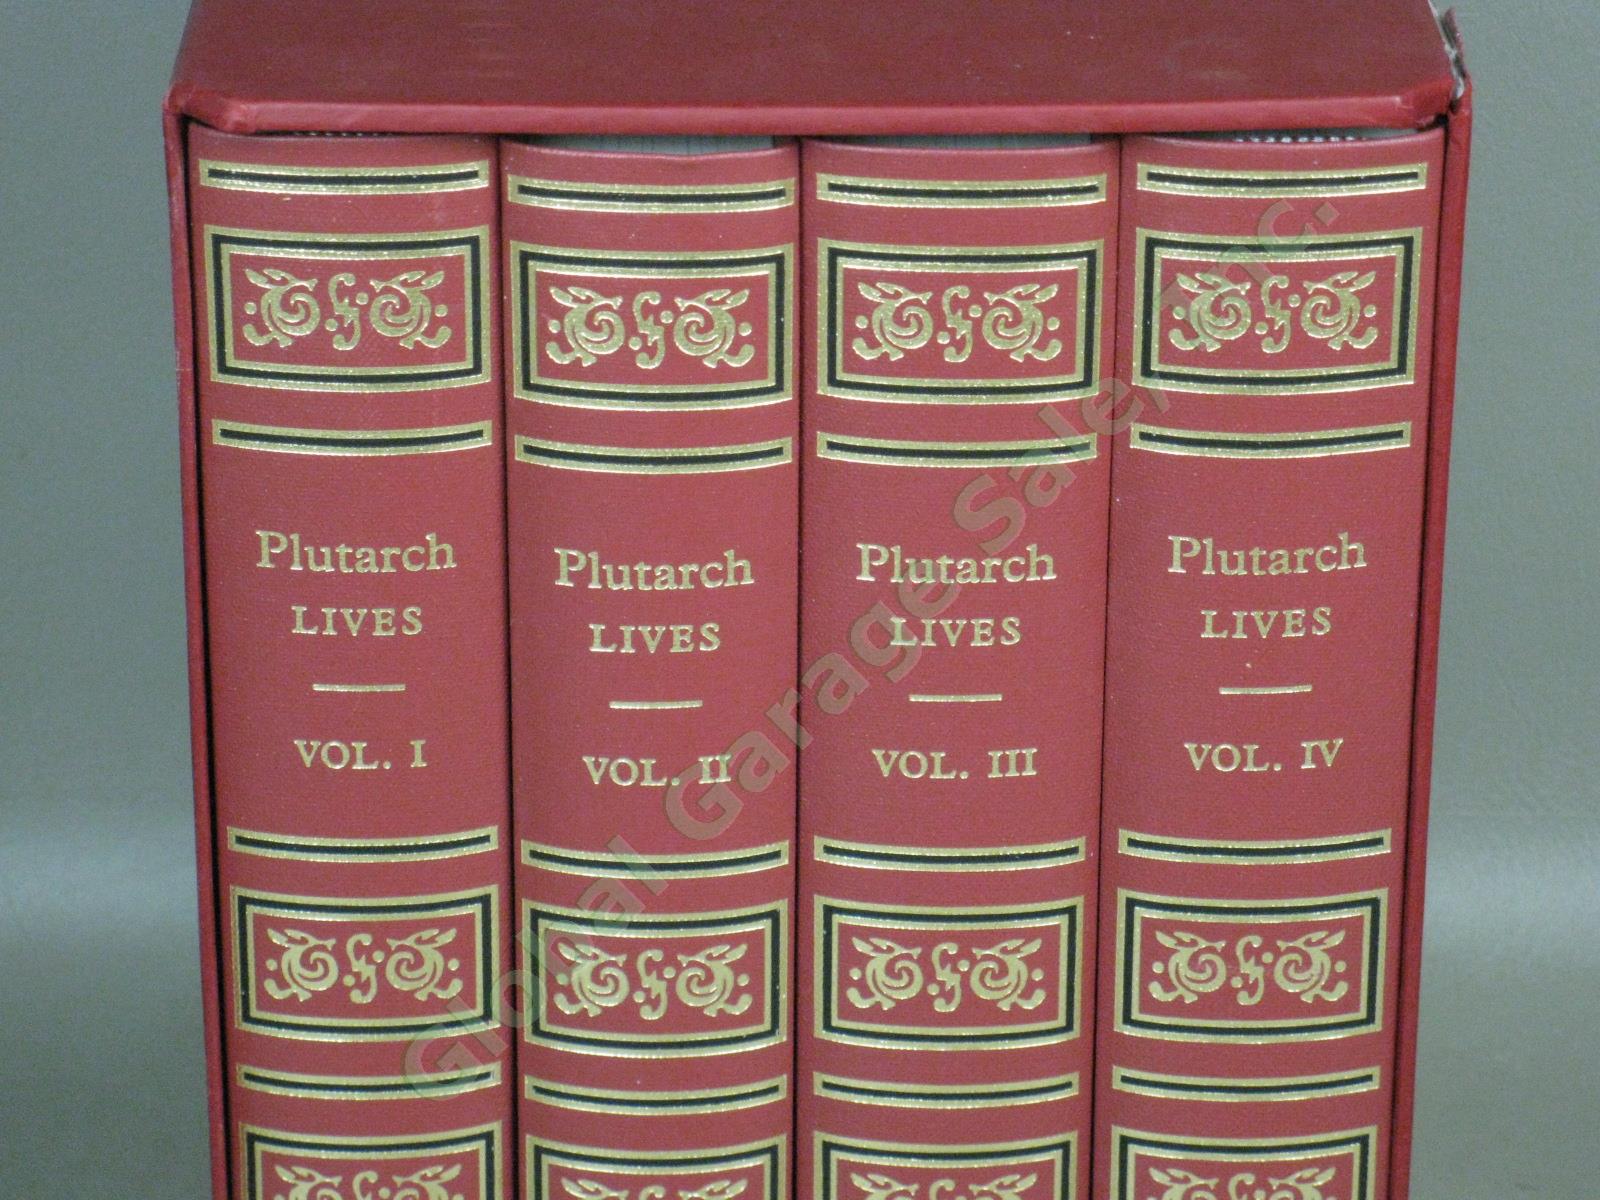 Plutarch Lives Folio Society 4-Volume Set I II III IV Hardcover Mint Condition! 1